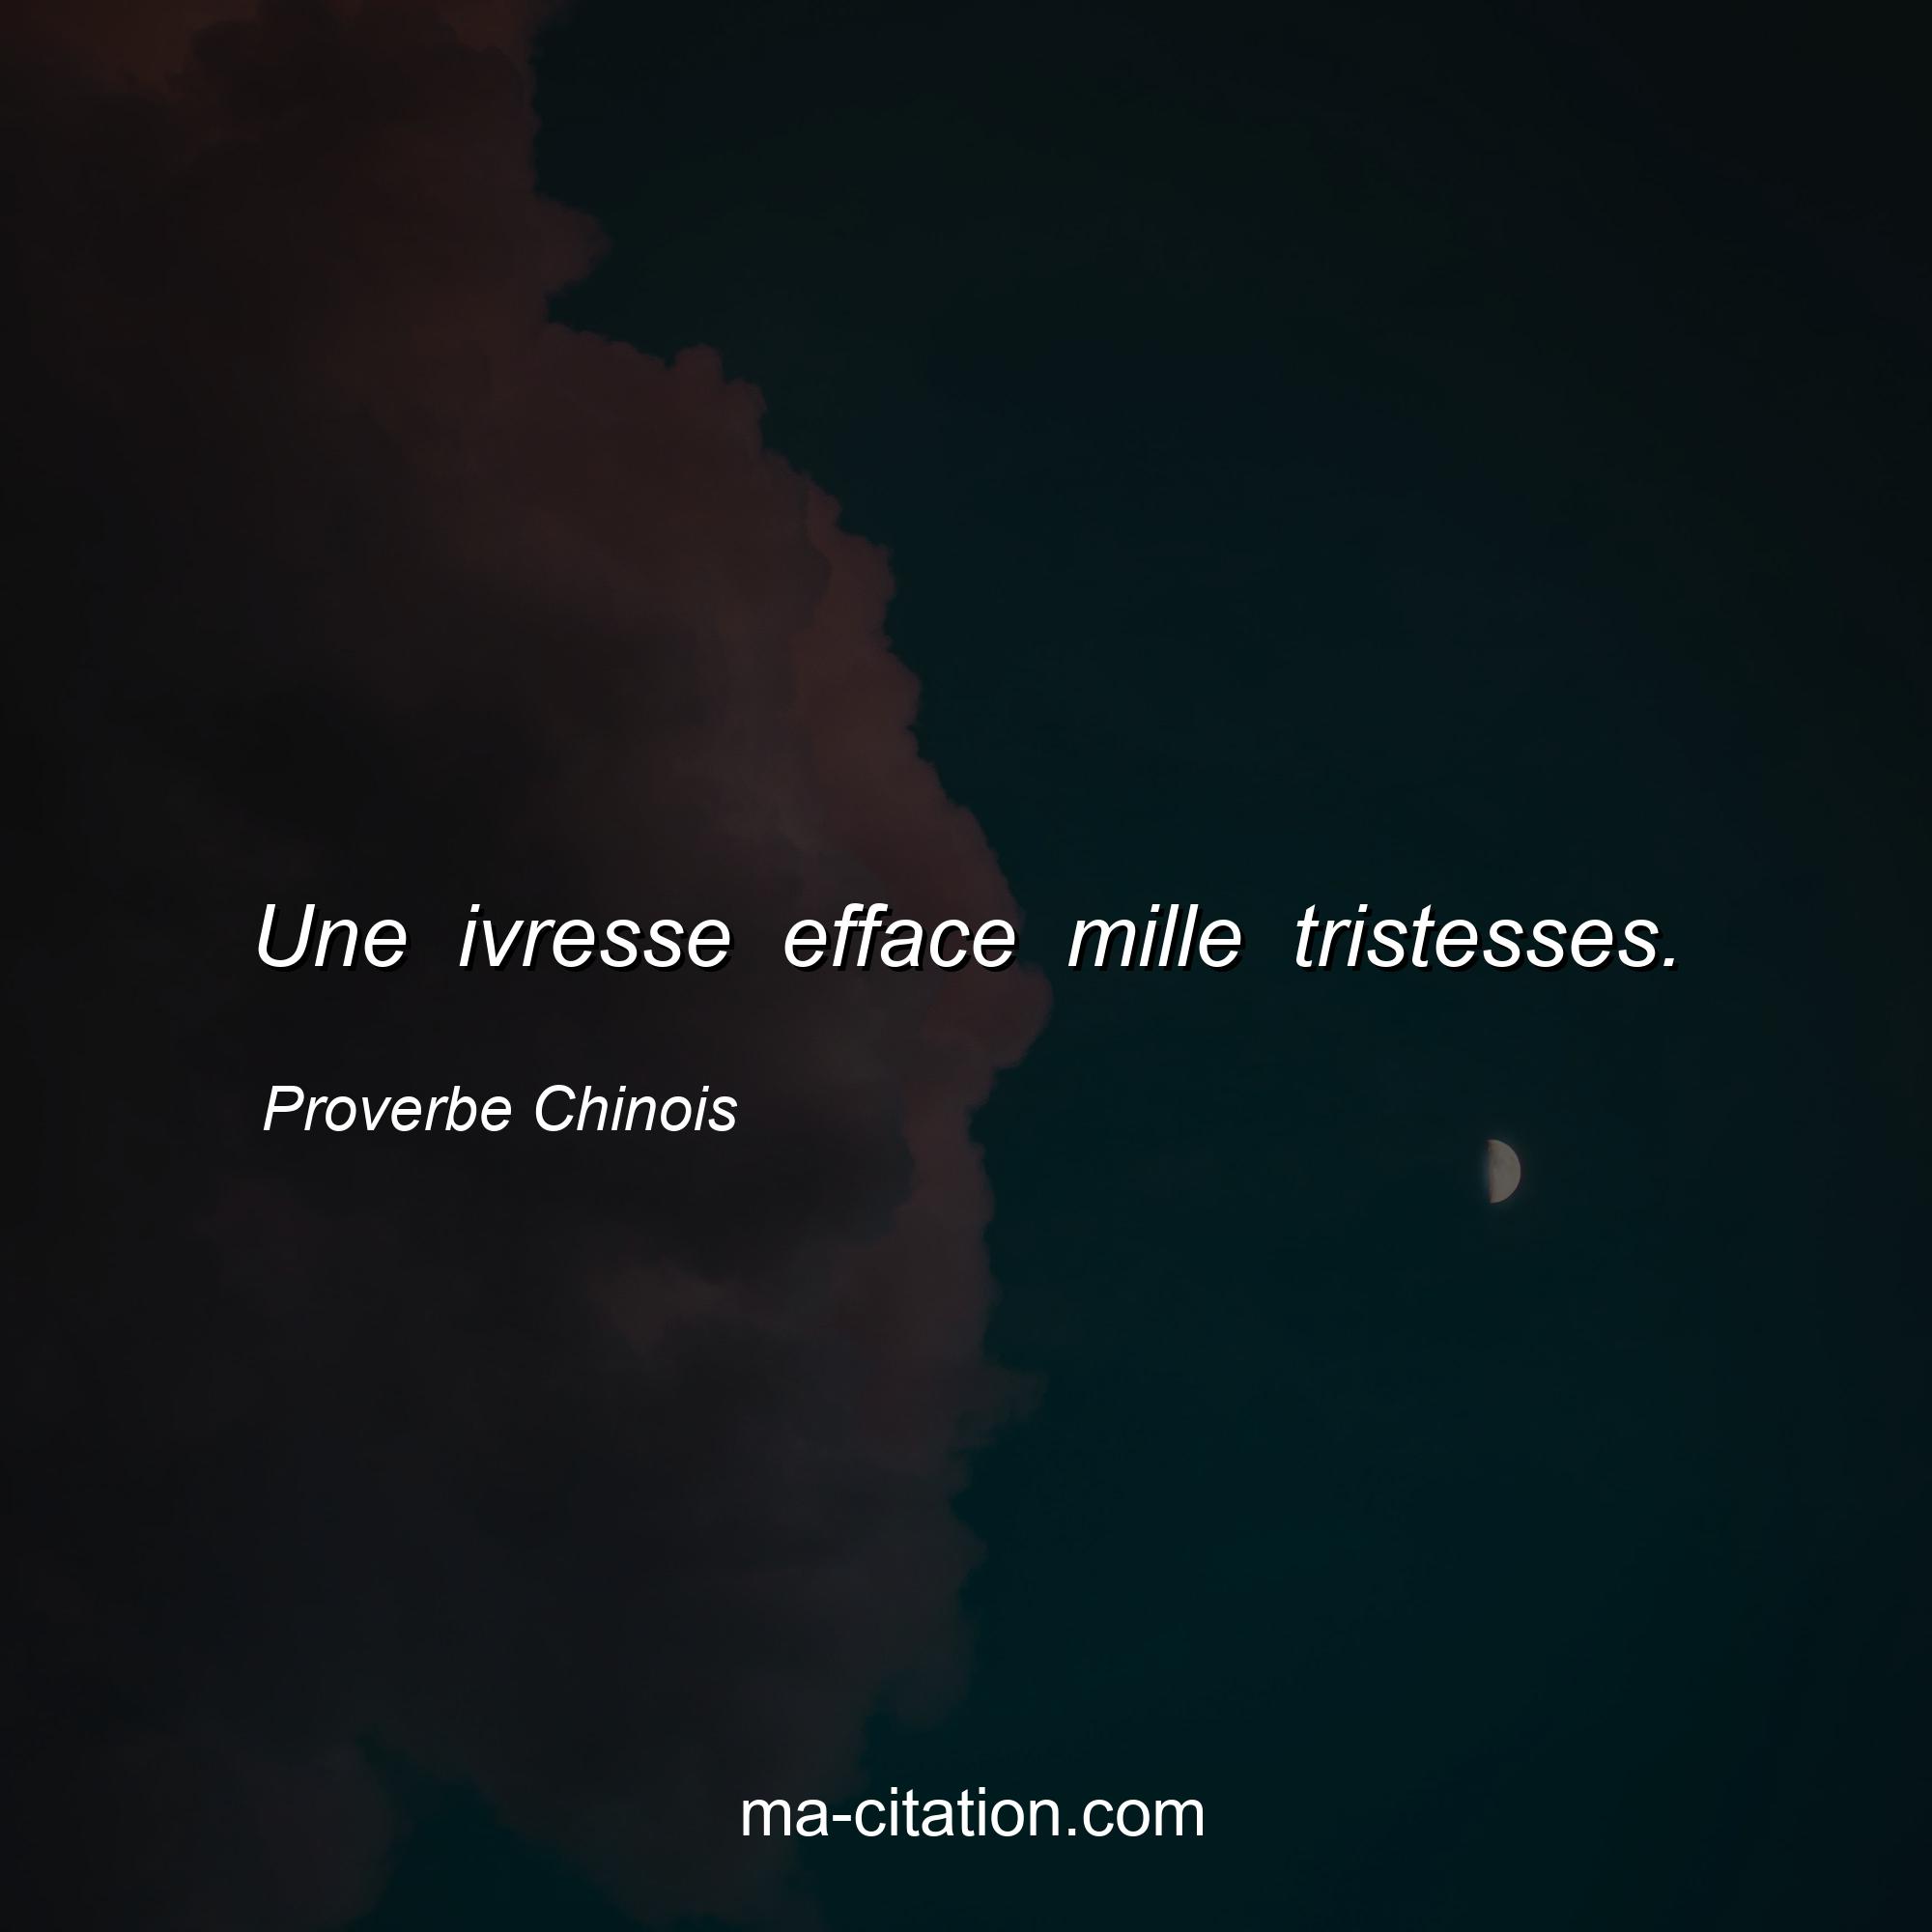 Proverbe Chinois : Une ivresse efface mille tristesses.